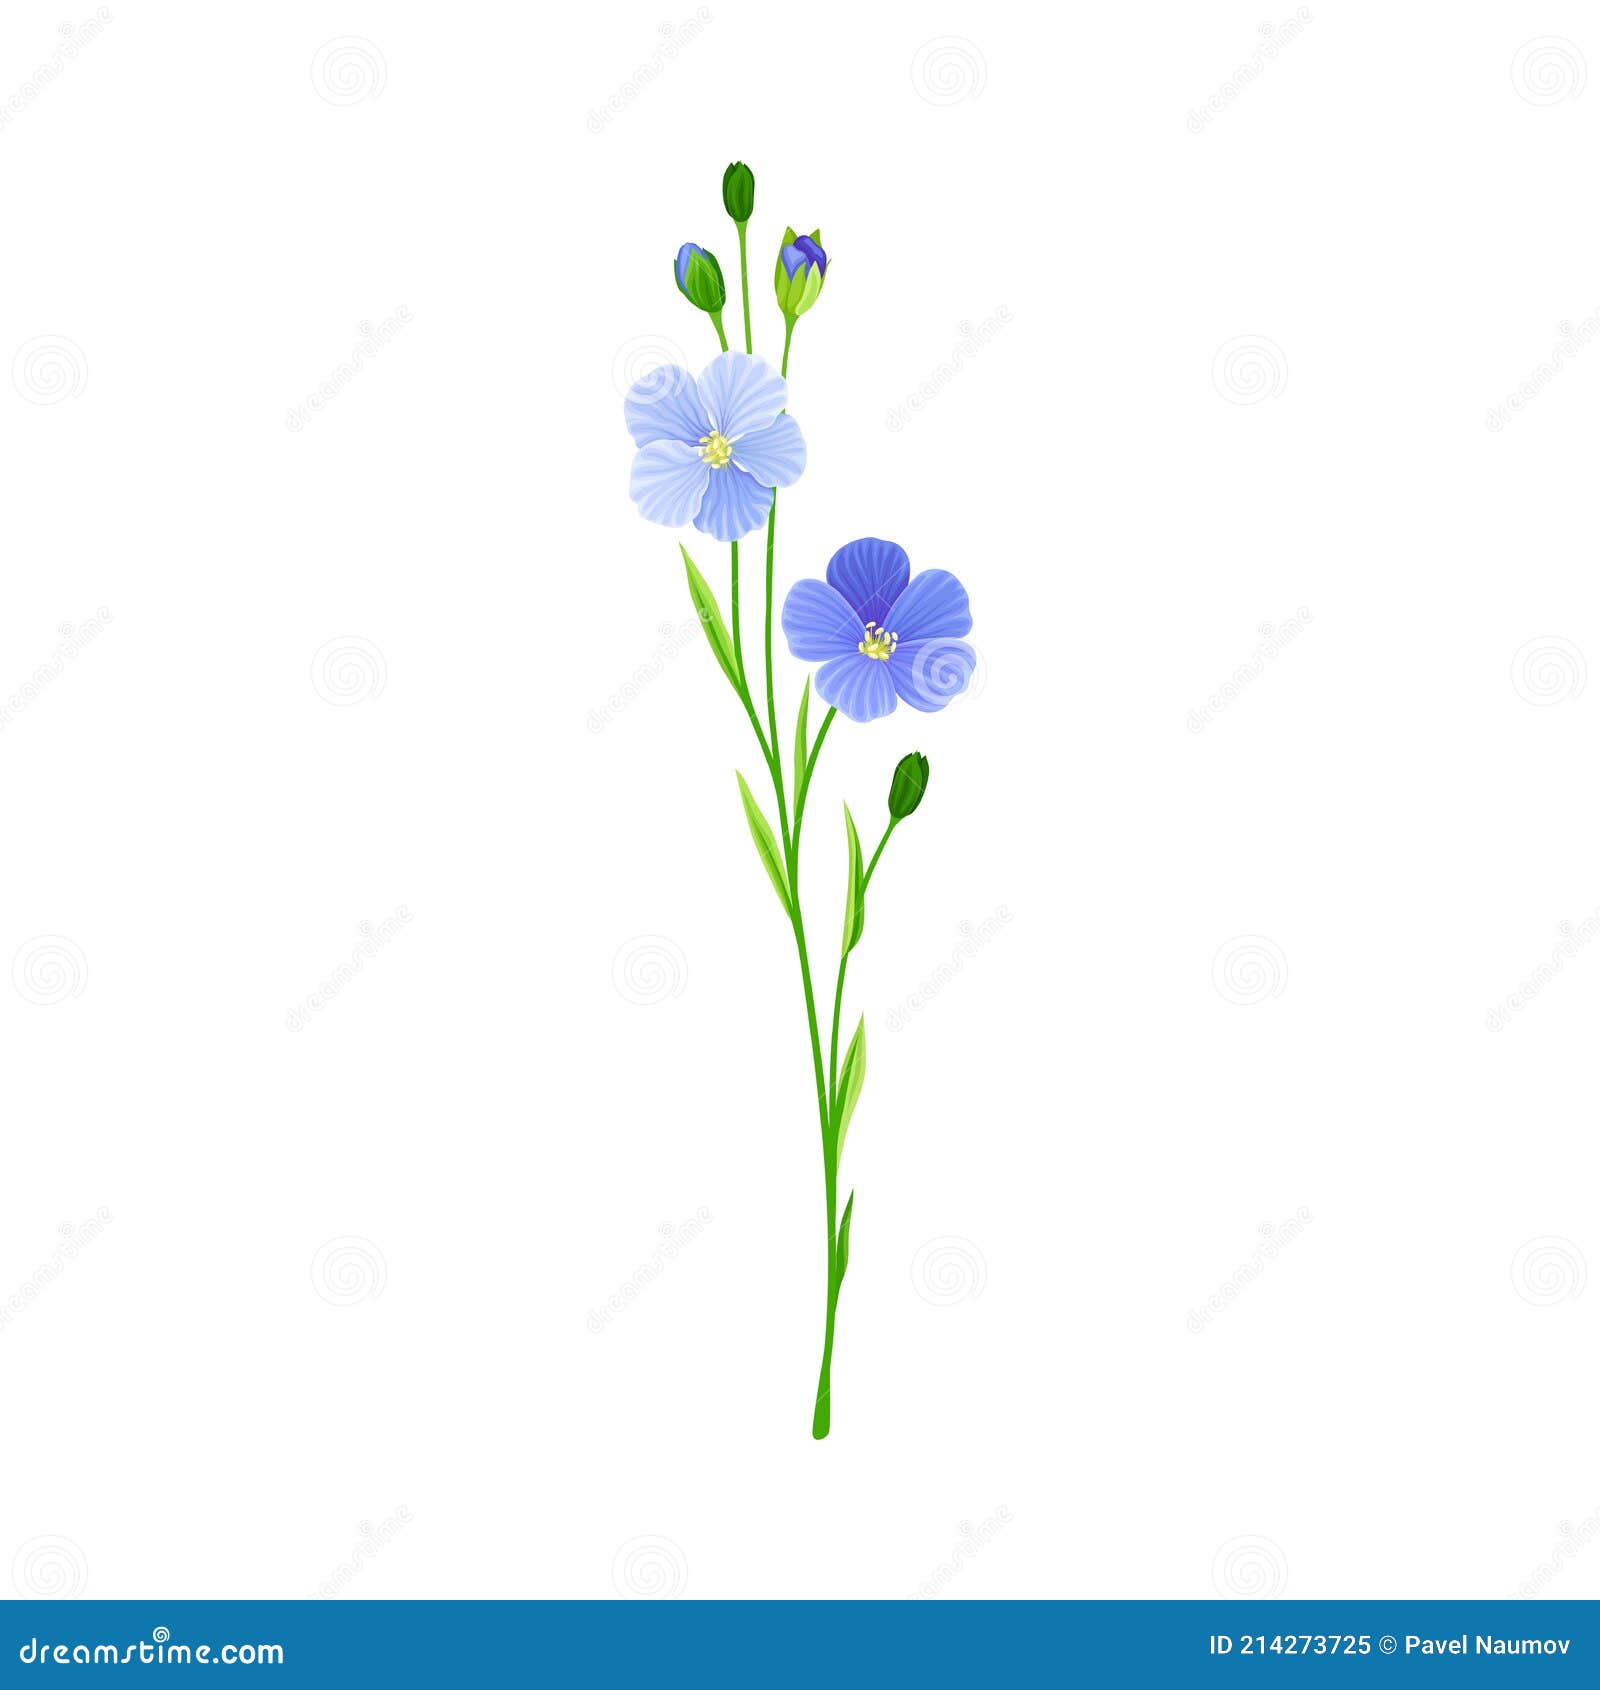 Blue Flax or Linseed Flowers with Five Petals As Cultivated Flowering ...